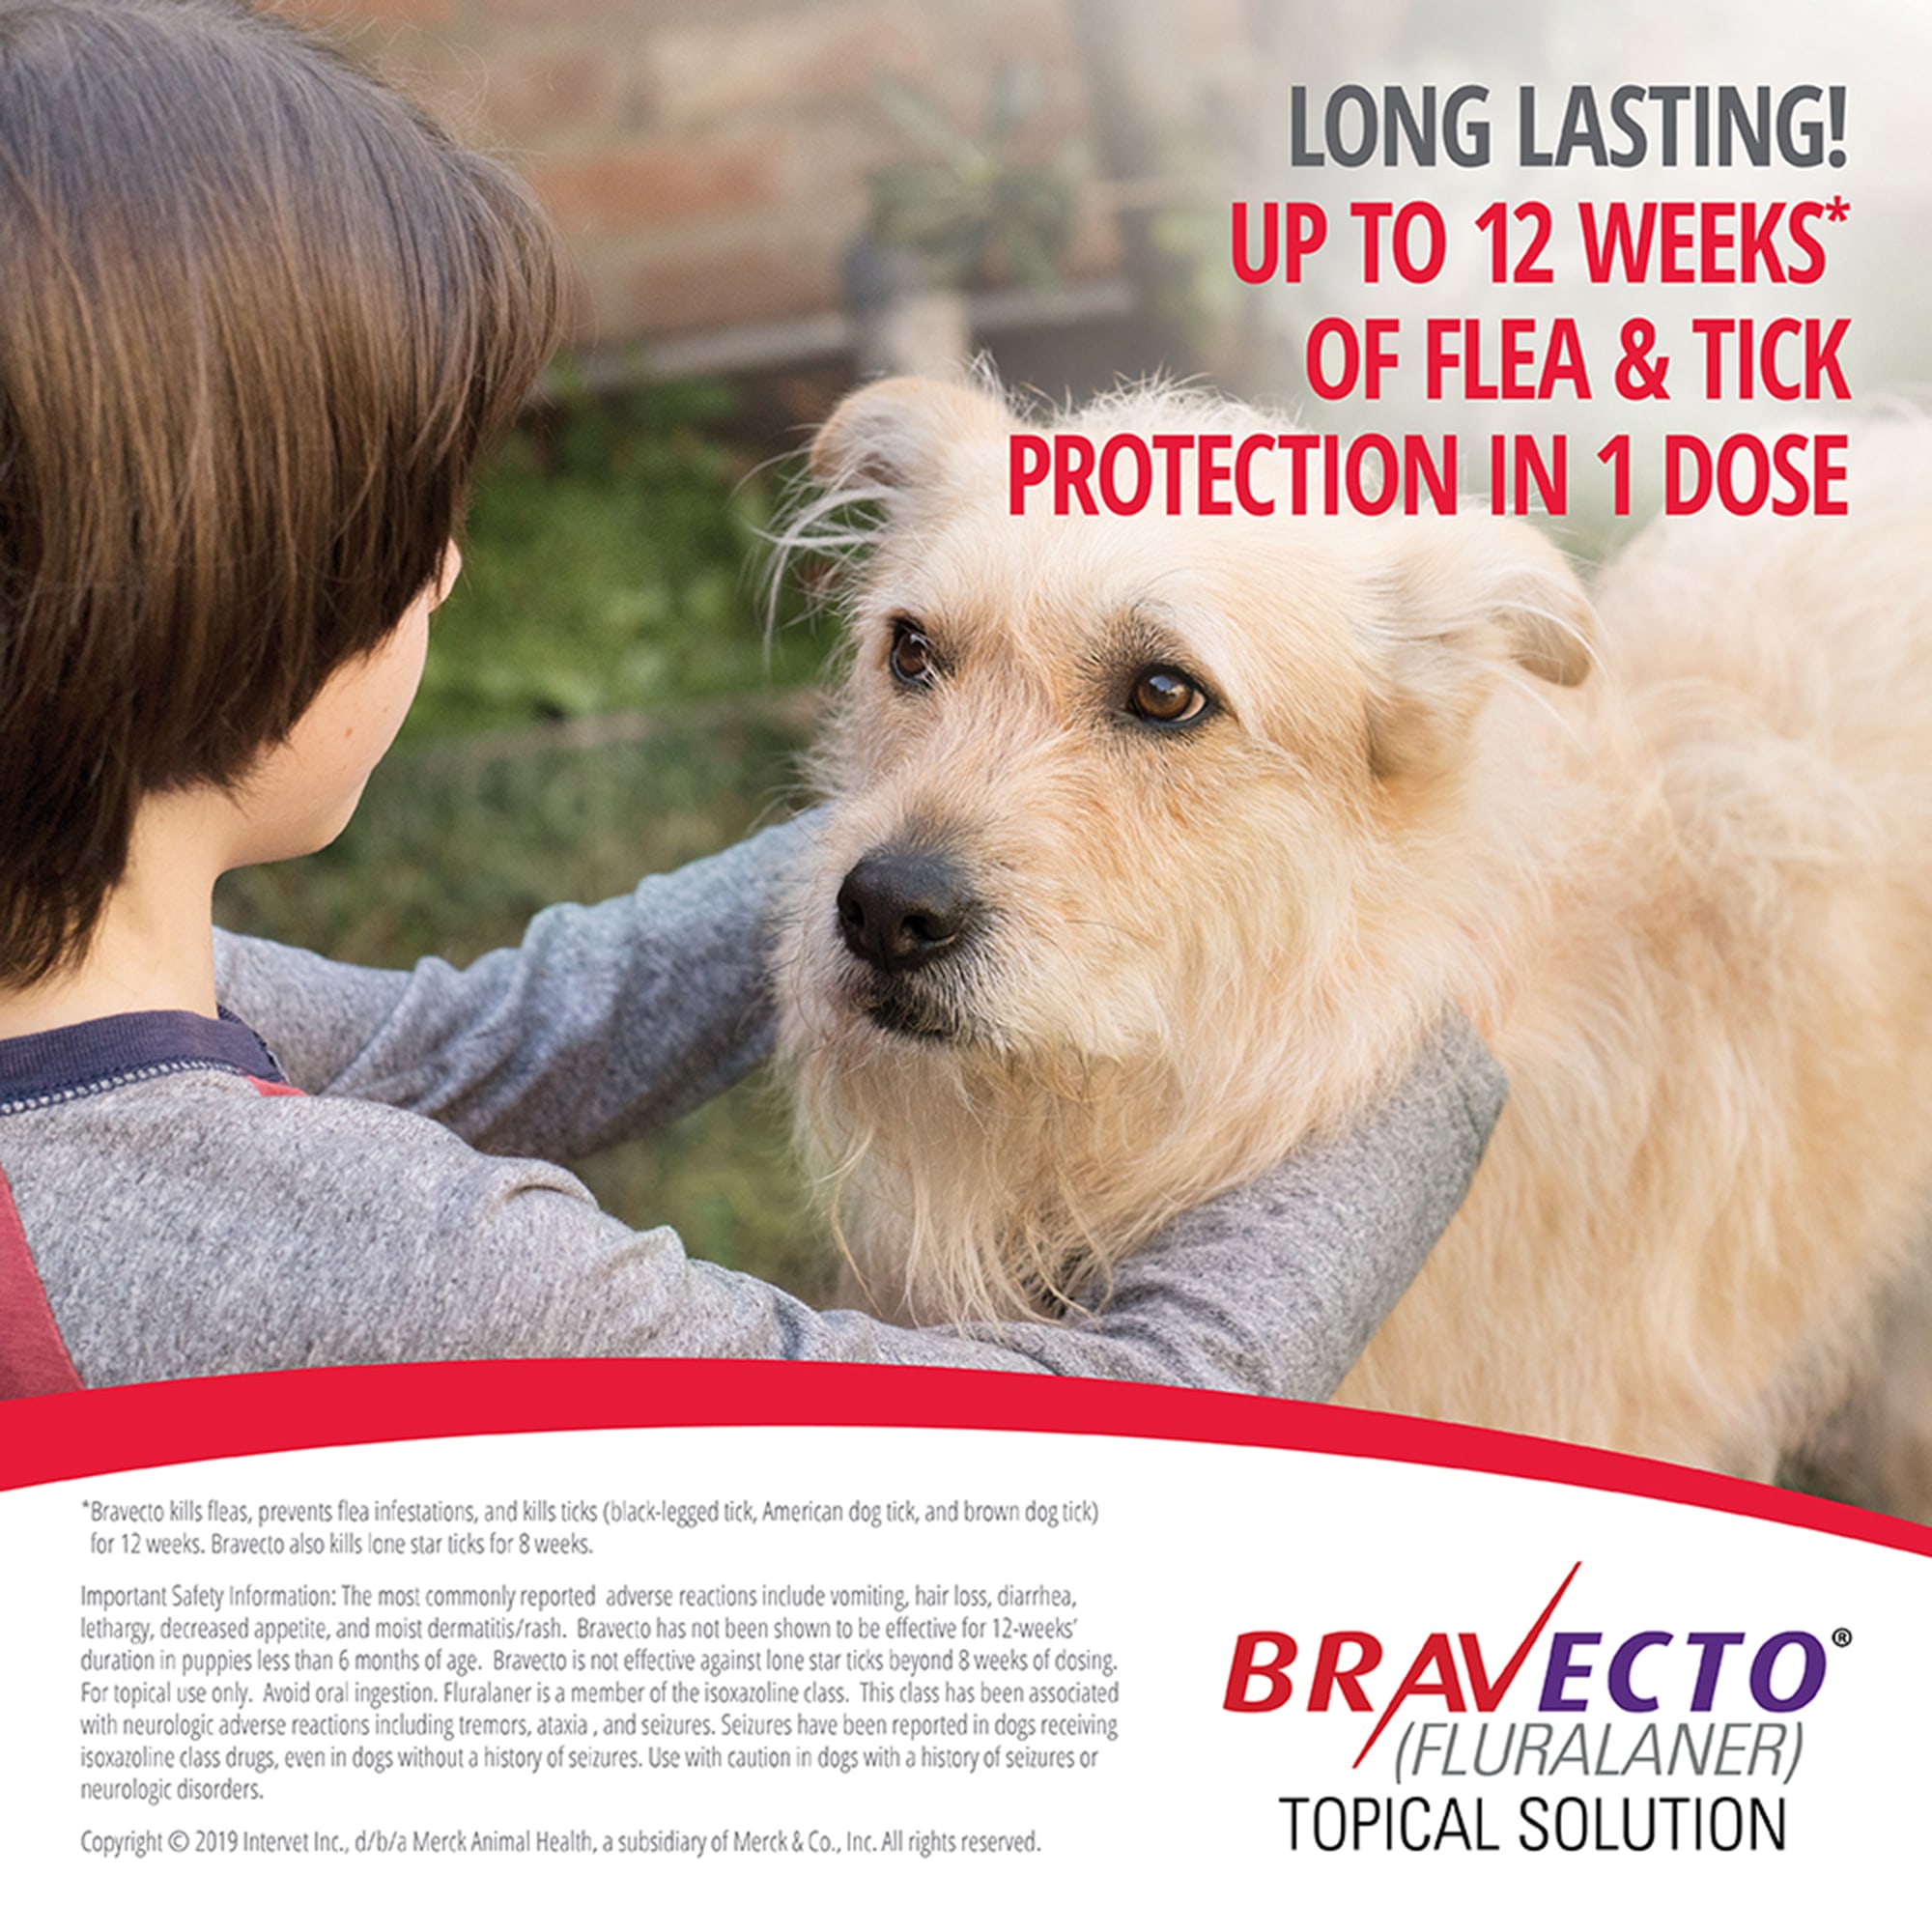 Bravecto Topical Solution for Dogs 9.9-22 lbs, 3 Month Supply